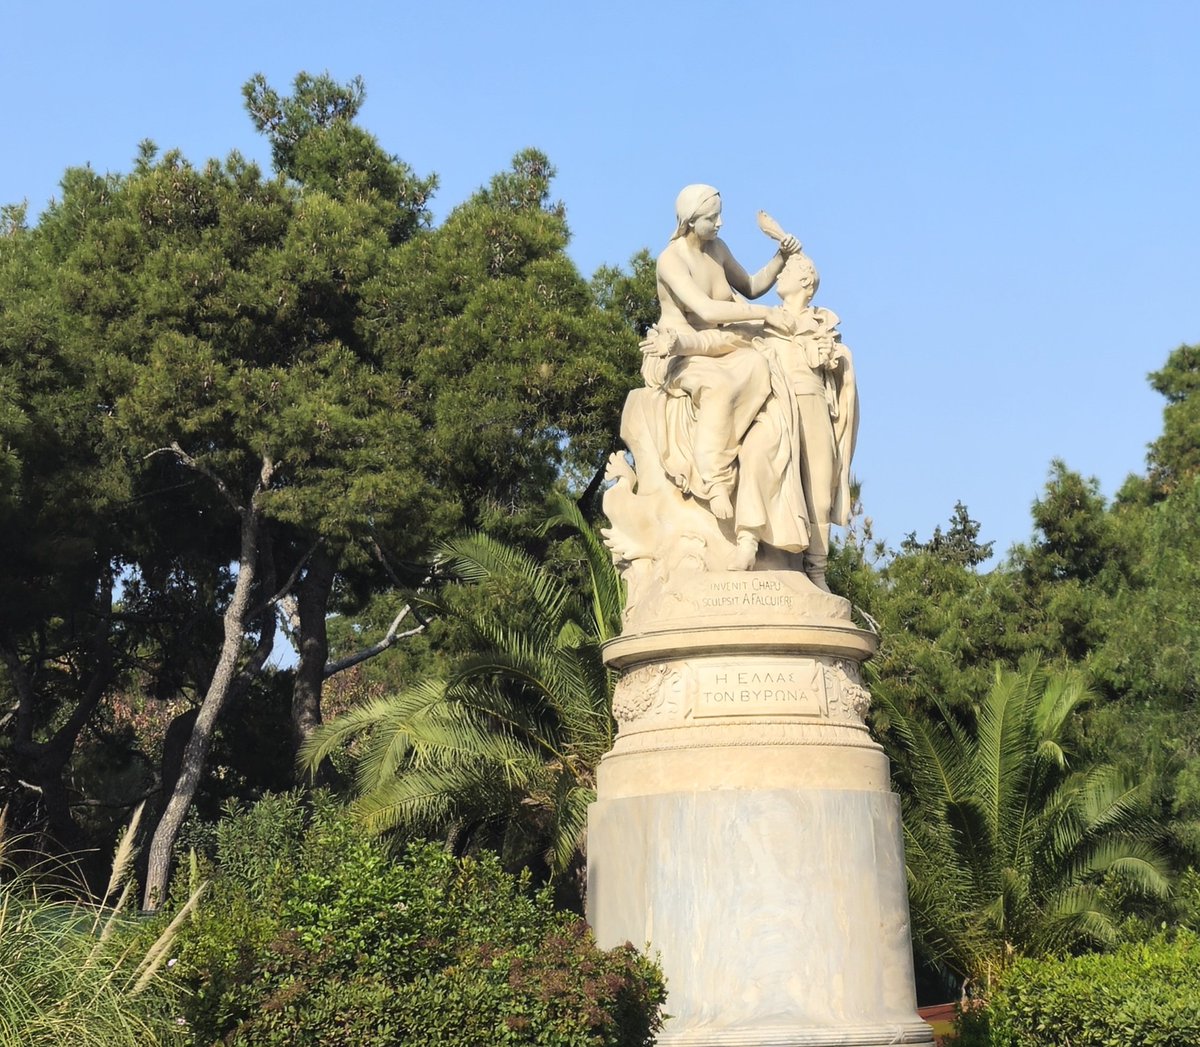 200 years ago today, Lord Byron died in Missolonghi, Greece at the age of 36. The greatest of the Philhellenes, non-greeks who fought to liberate Greece from centuries of Turkish occupation, he's loved in Greece but still a subject of gossip in the UK.

greekreporter.com/2018/04/19/lor…